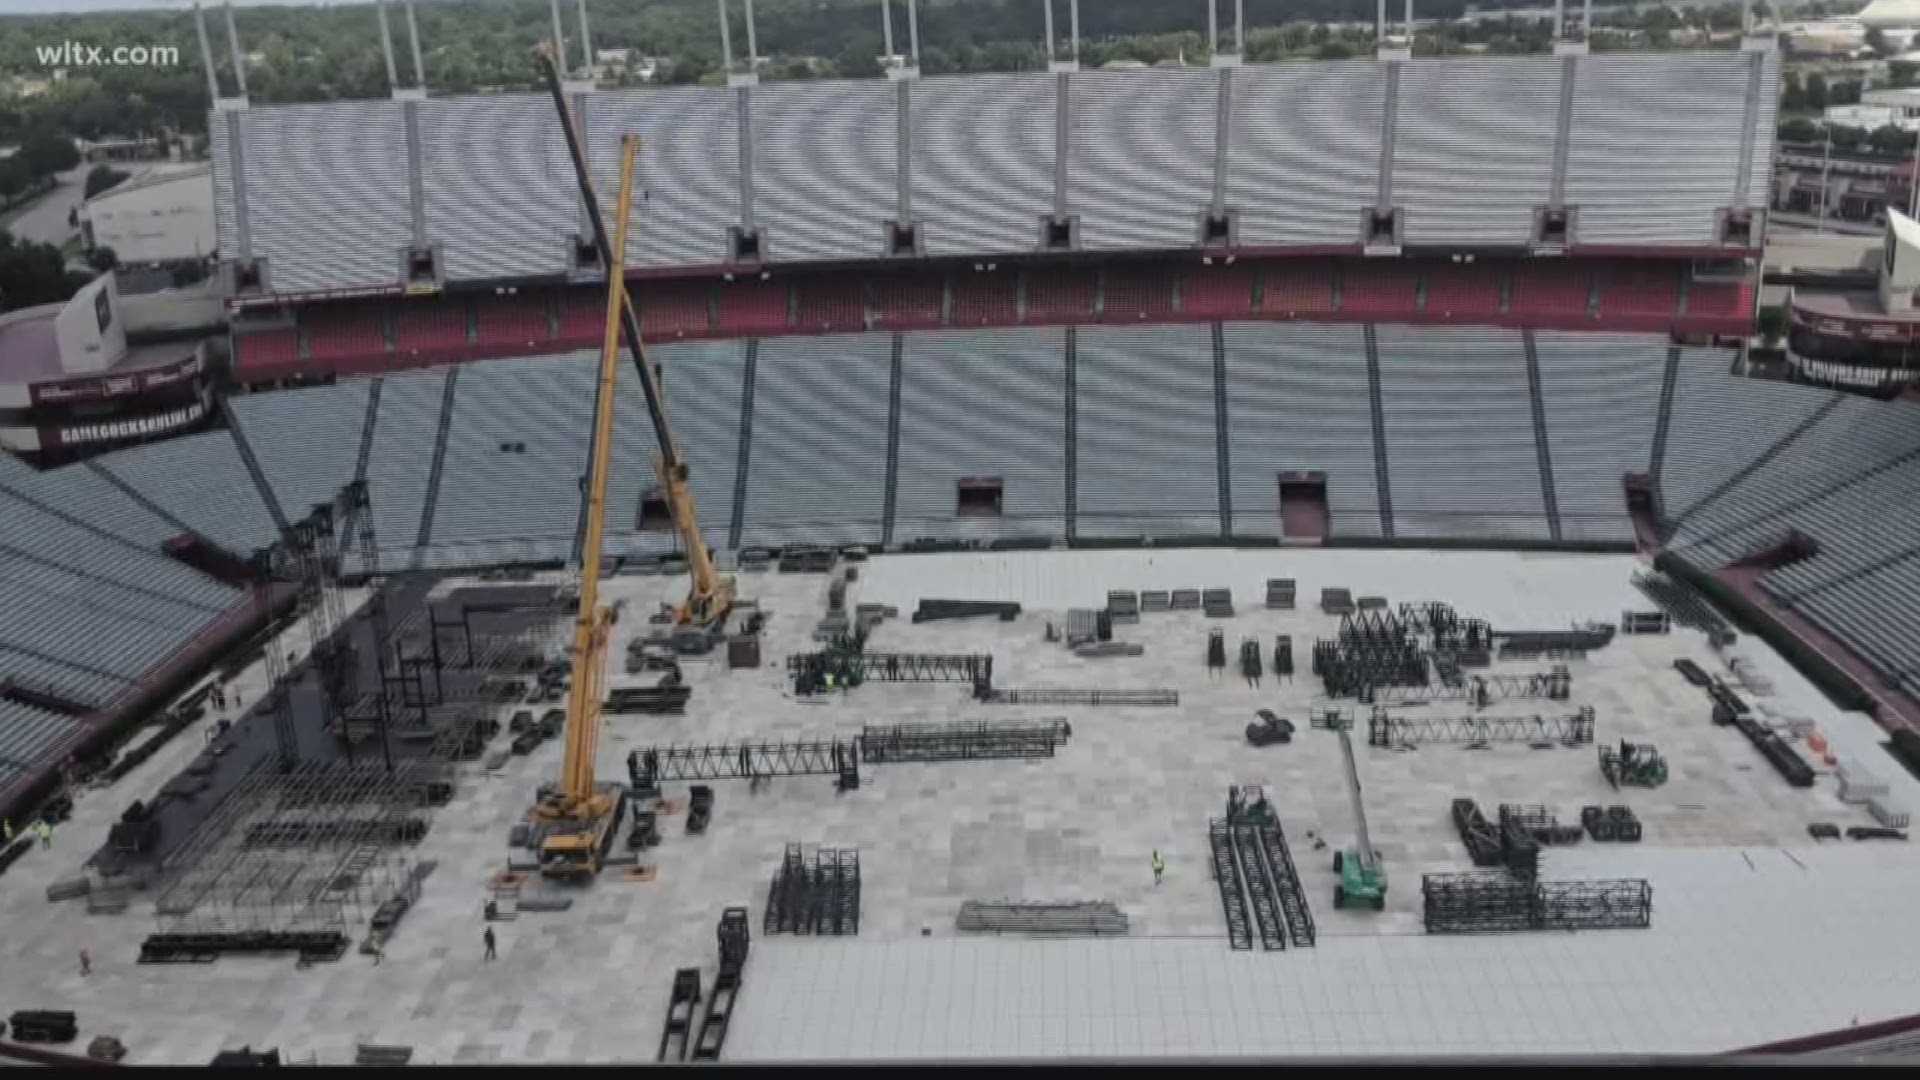 Williams-Brice Stadium's field may need a make over after the Jay-Z and Beyonce concert next week 